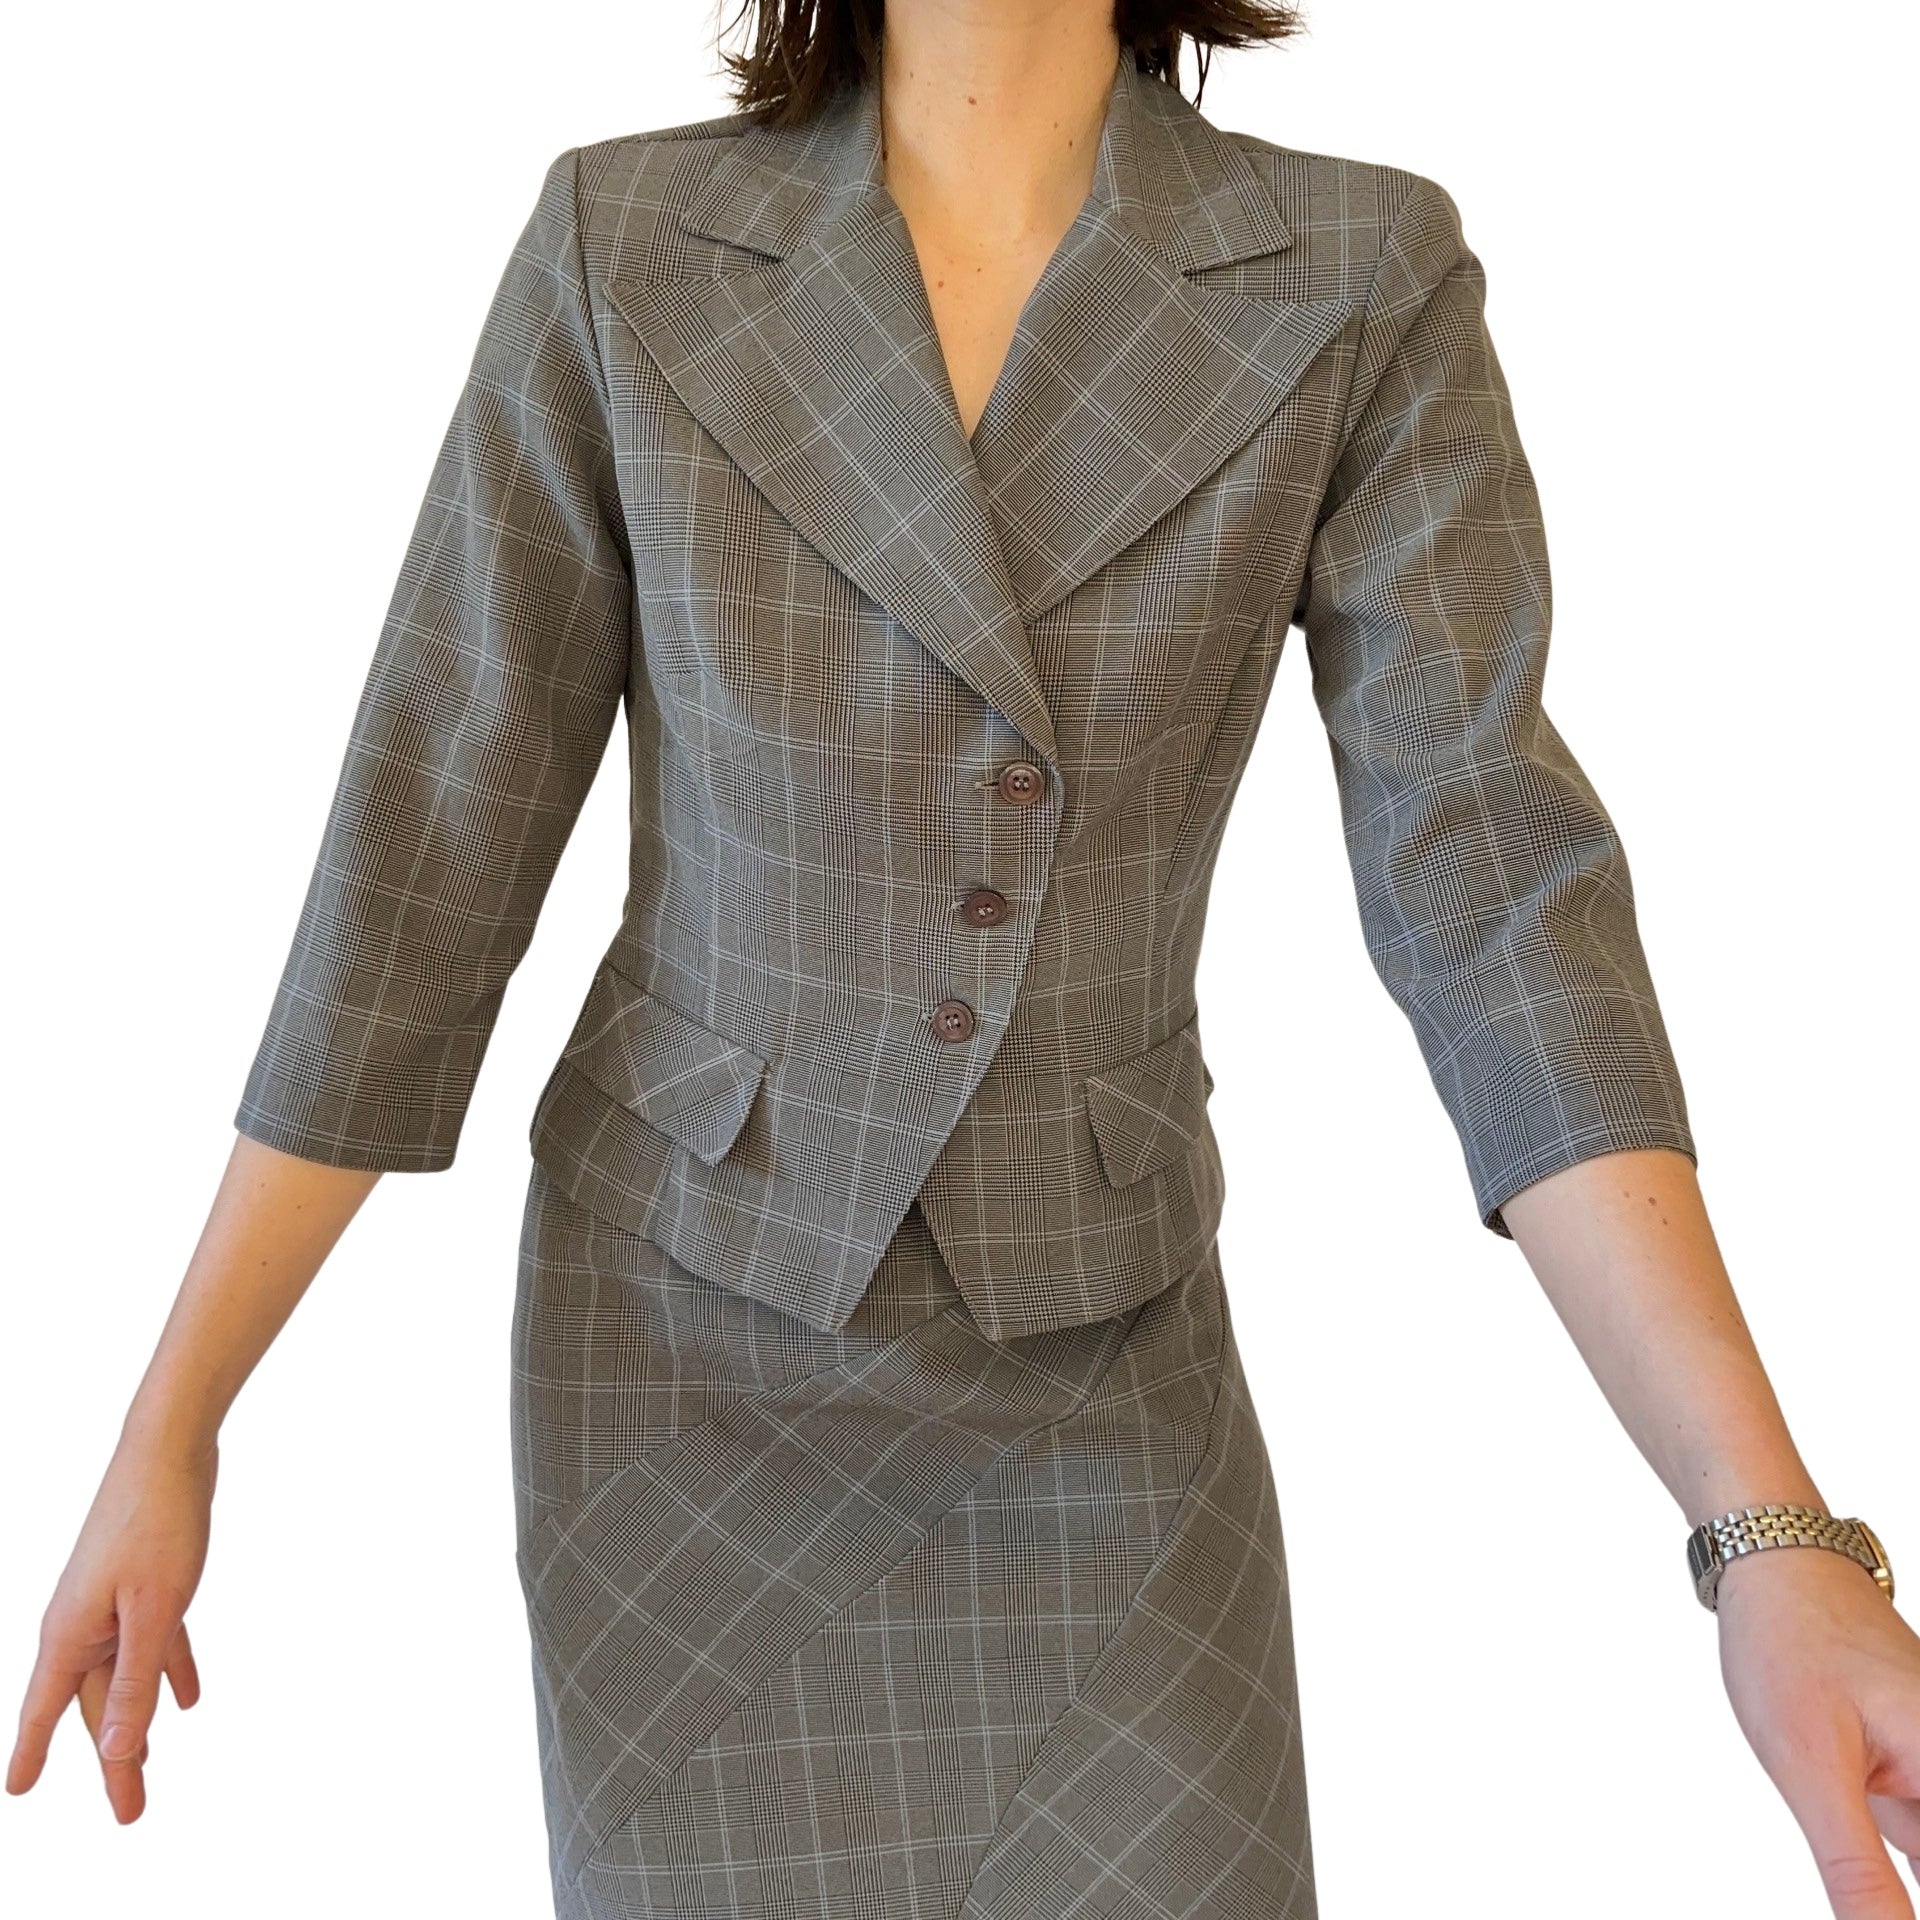 90s Two-Piece Skirt Suit (S)